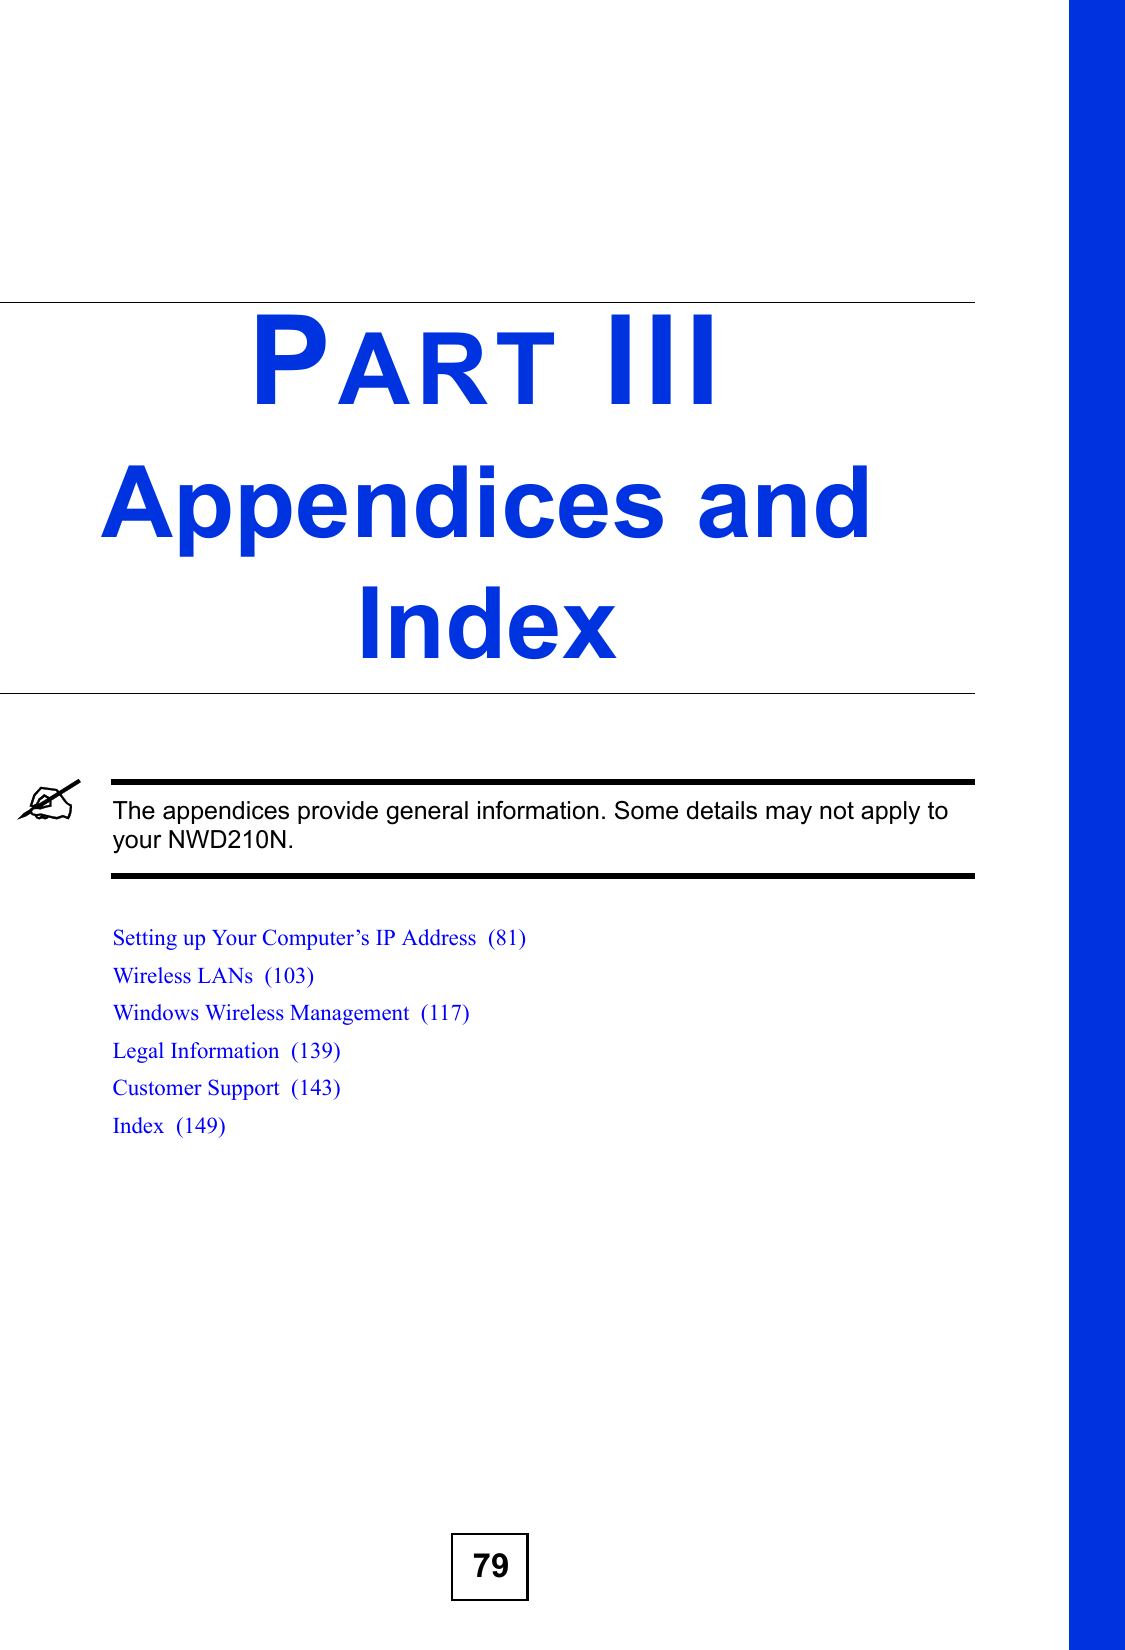 79PART IIIAppendices and Index&quot;The appendices provide general information. Some details may not apply to your NWD210N.Setting up Your Computer’s IP Address  (81)Wireless LANs  (103)Windows Wireless Management  (117)Legal Information  (139)Customer Support  (143)Index  (149)